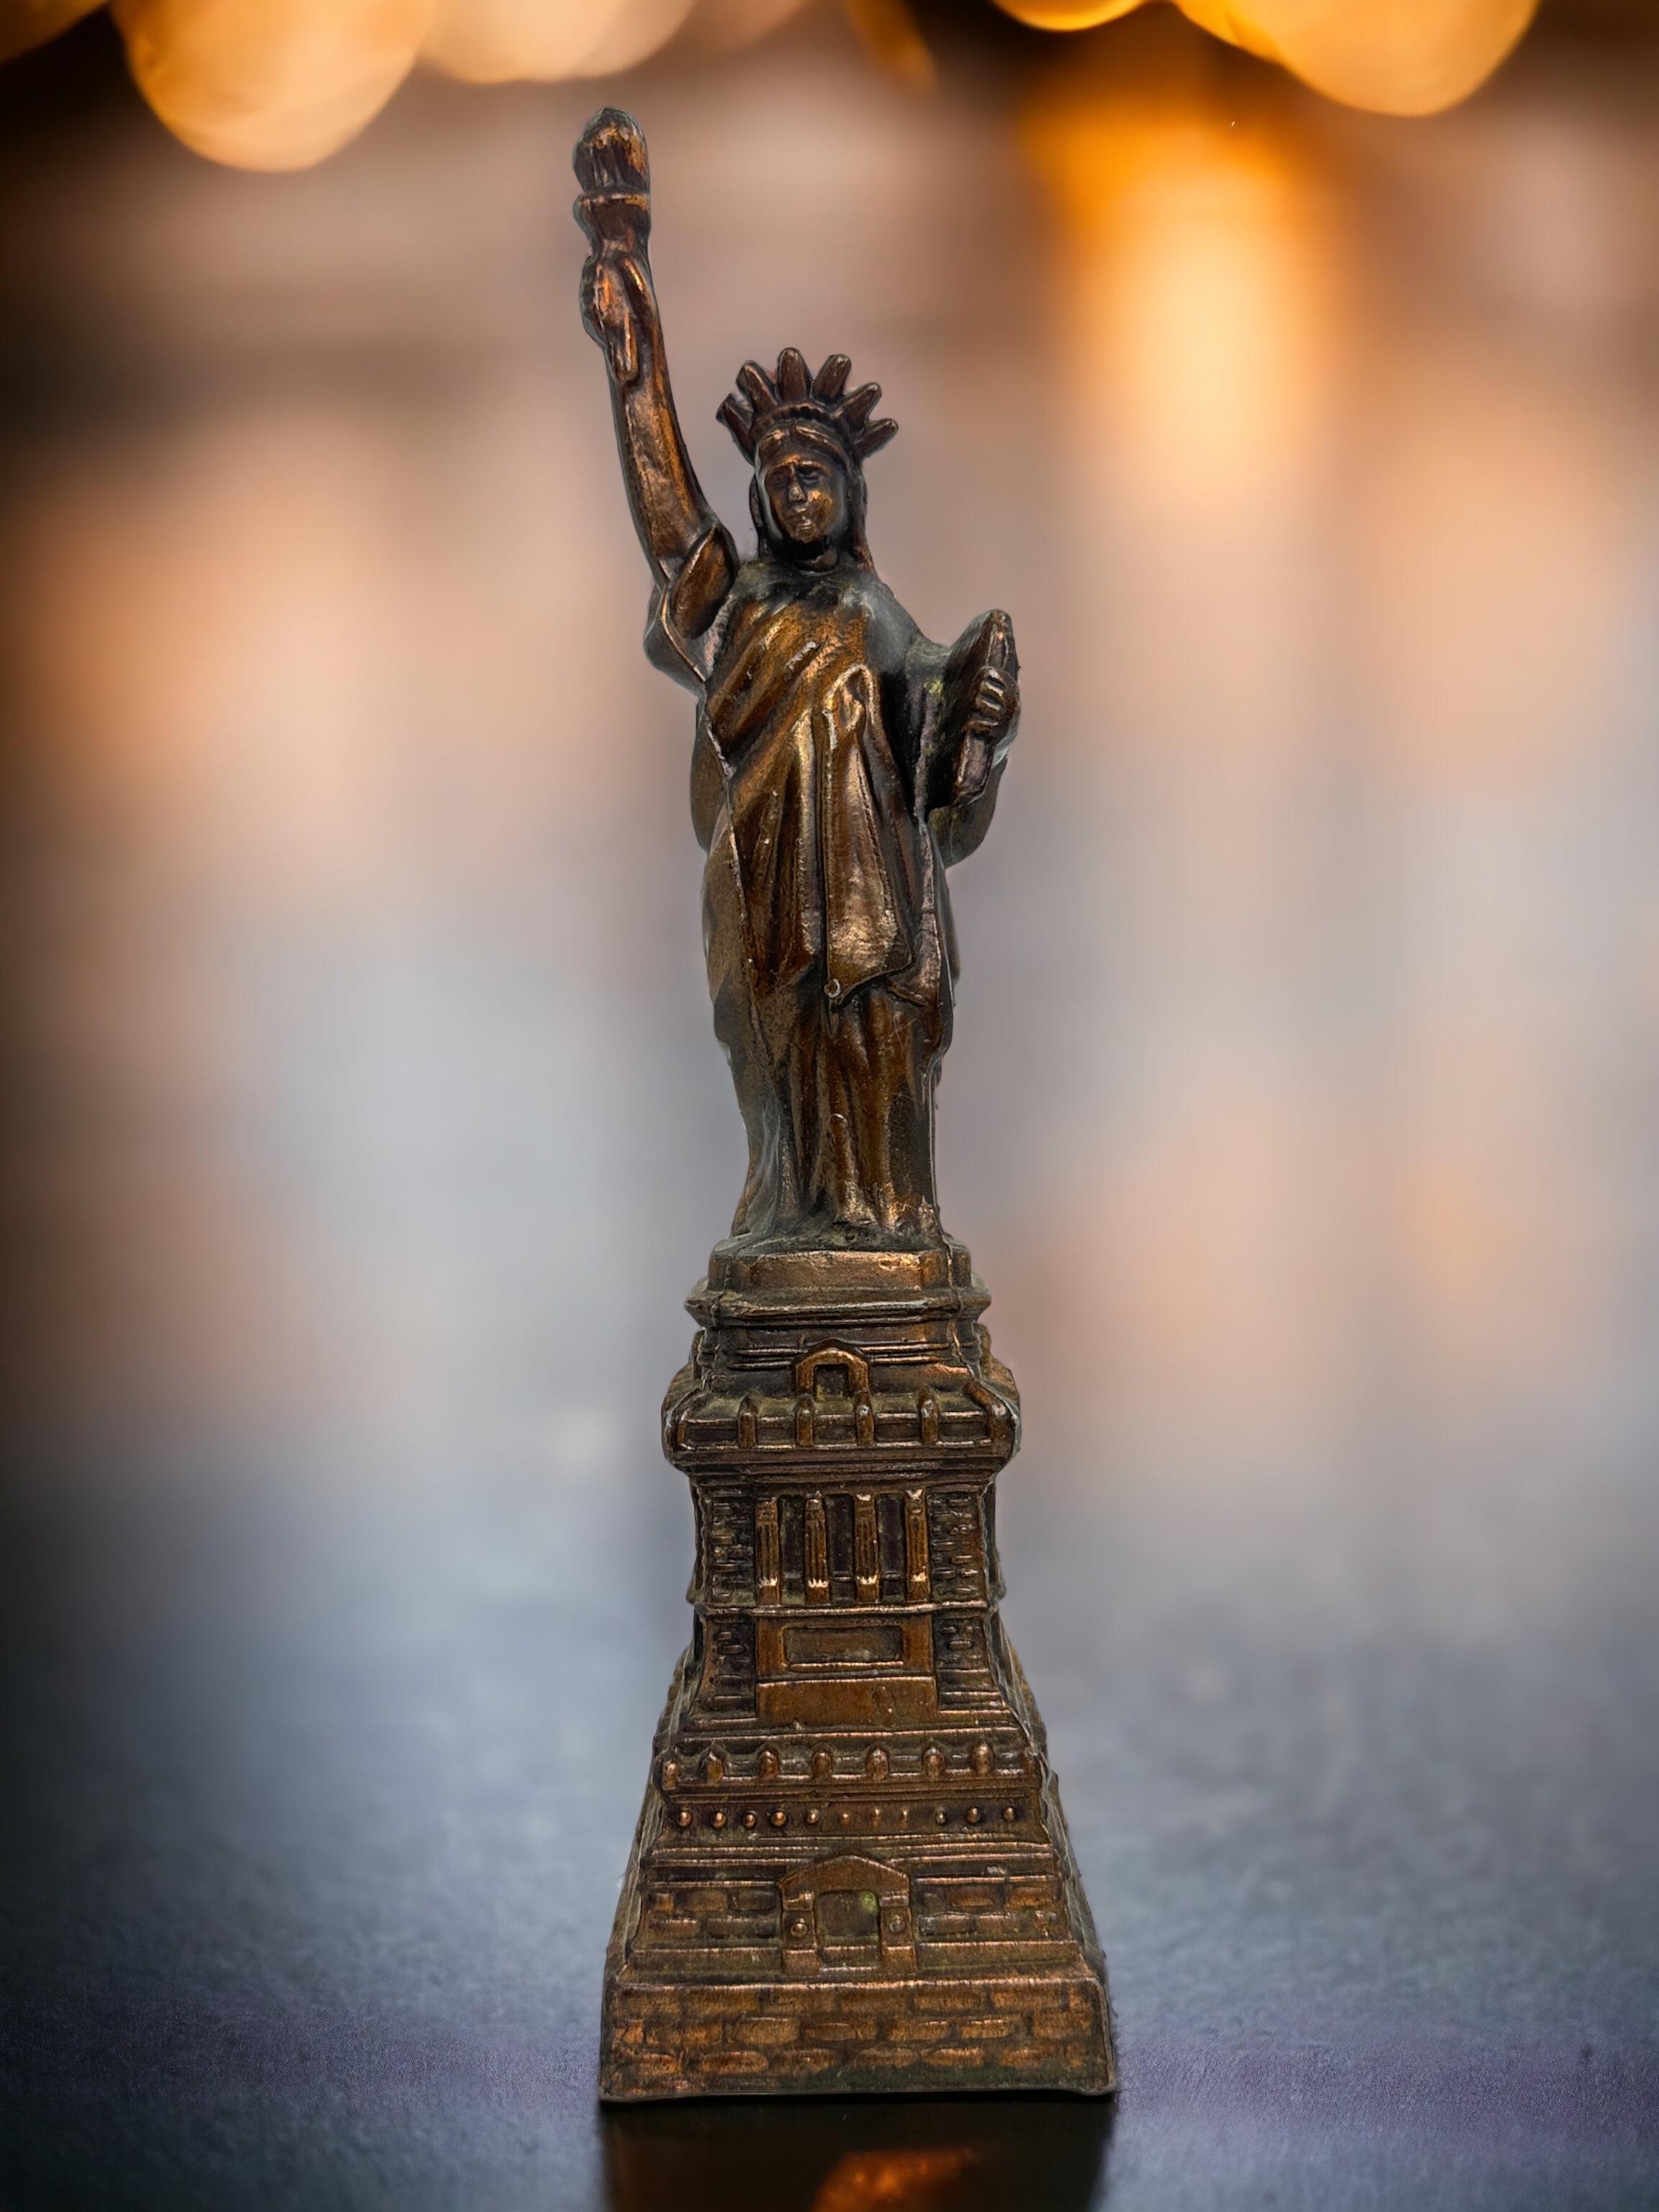 This vintage Statue of Liberty souvenir statue is being offered from a major estate sale in Vienna, Austria. Guaranteed old, original and as shown. It is impressive in size, measuring 9 1/2